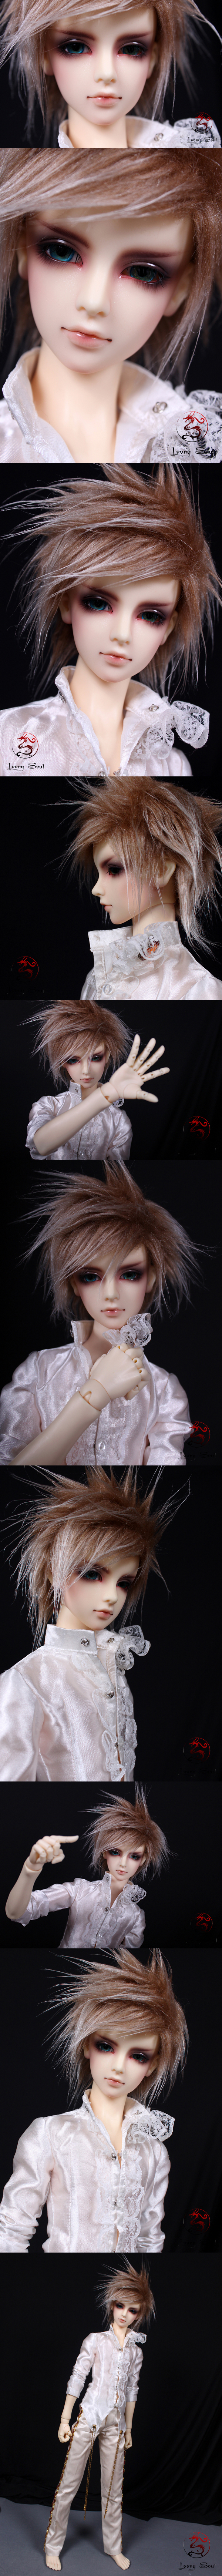 BJD Iven Boy Boll-jointed doll